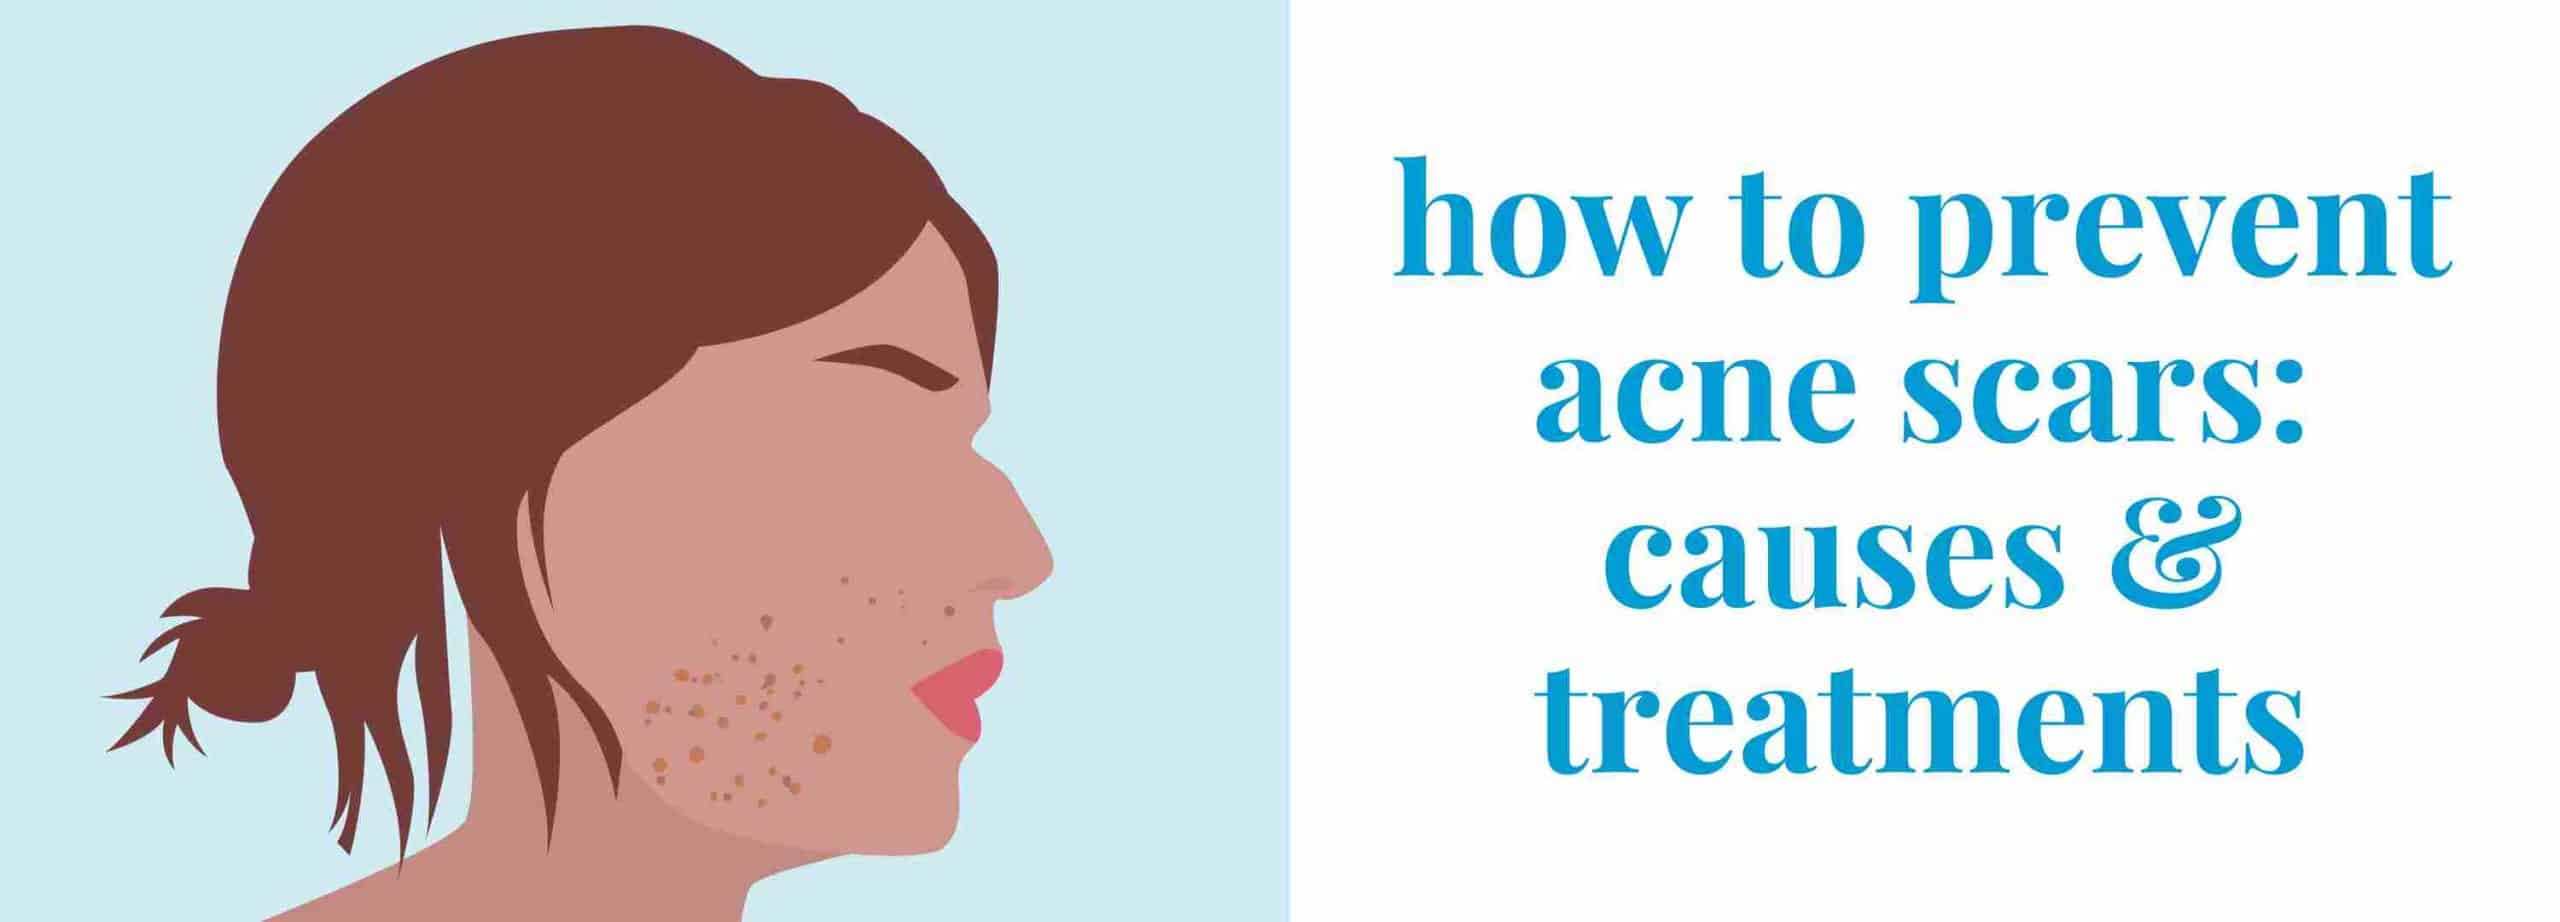 how to prevent acne scars: causes & treatment